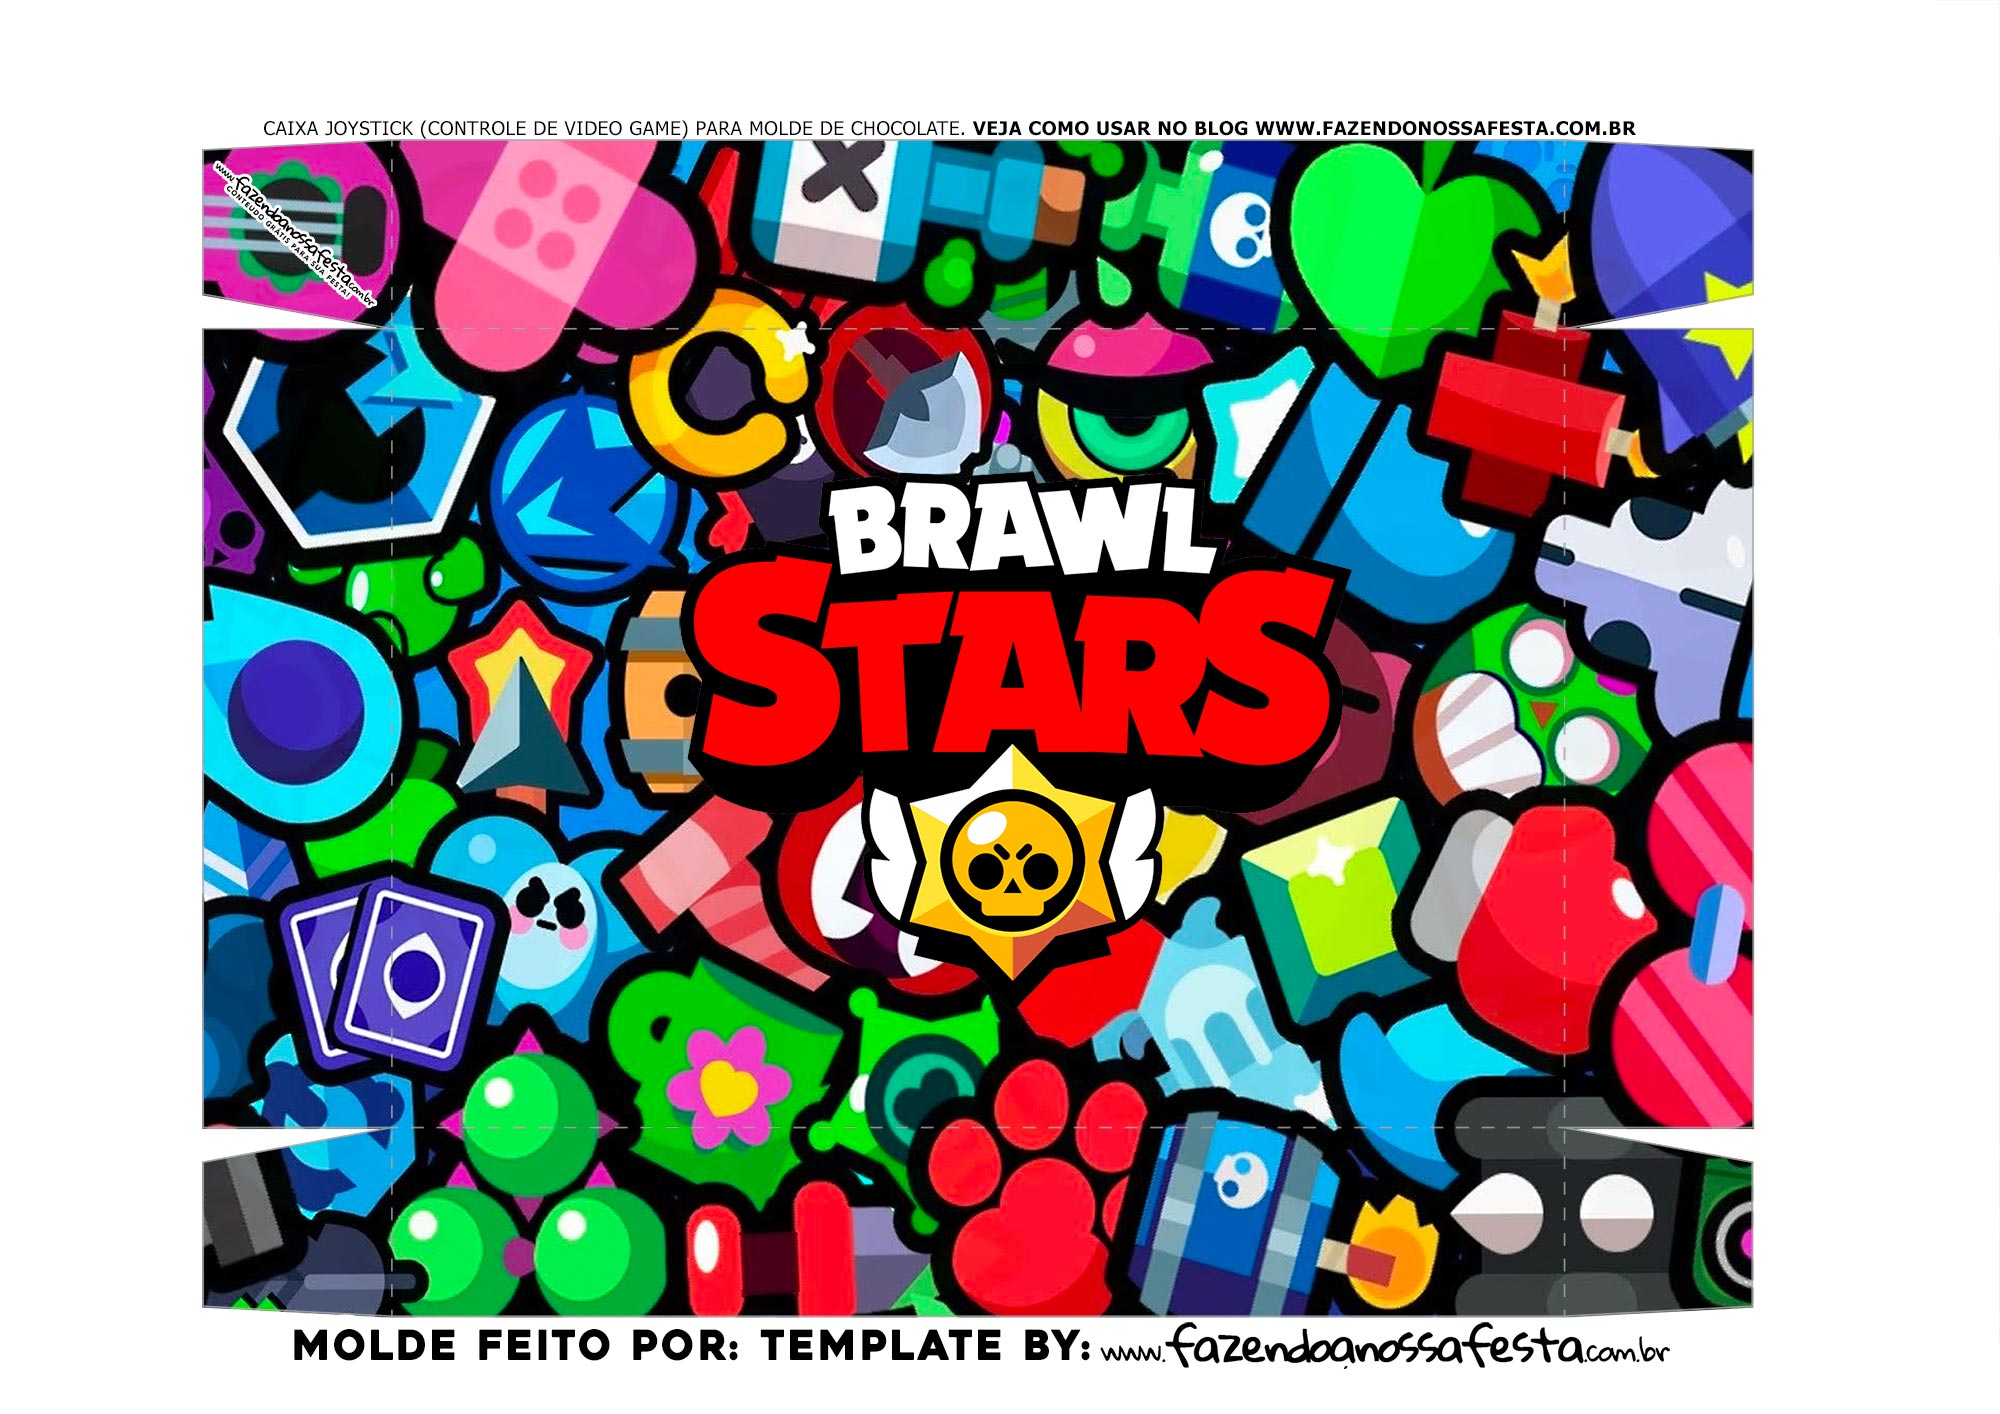 39 Top Pictures Joystick For Brawl Stars Mobile Games Made Better With A Dual Screen Lg Magazine Spirit Akixetht - foto de fundo do brawl stars